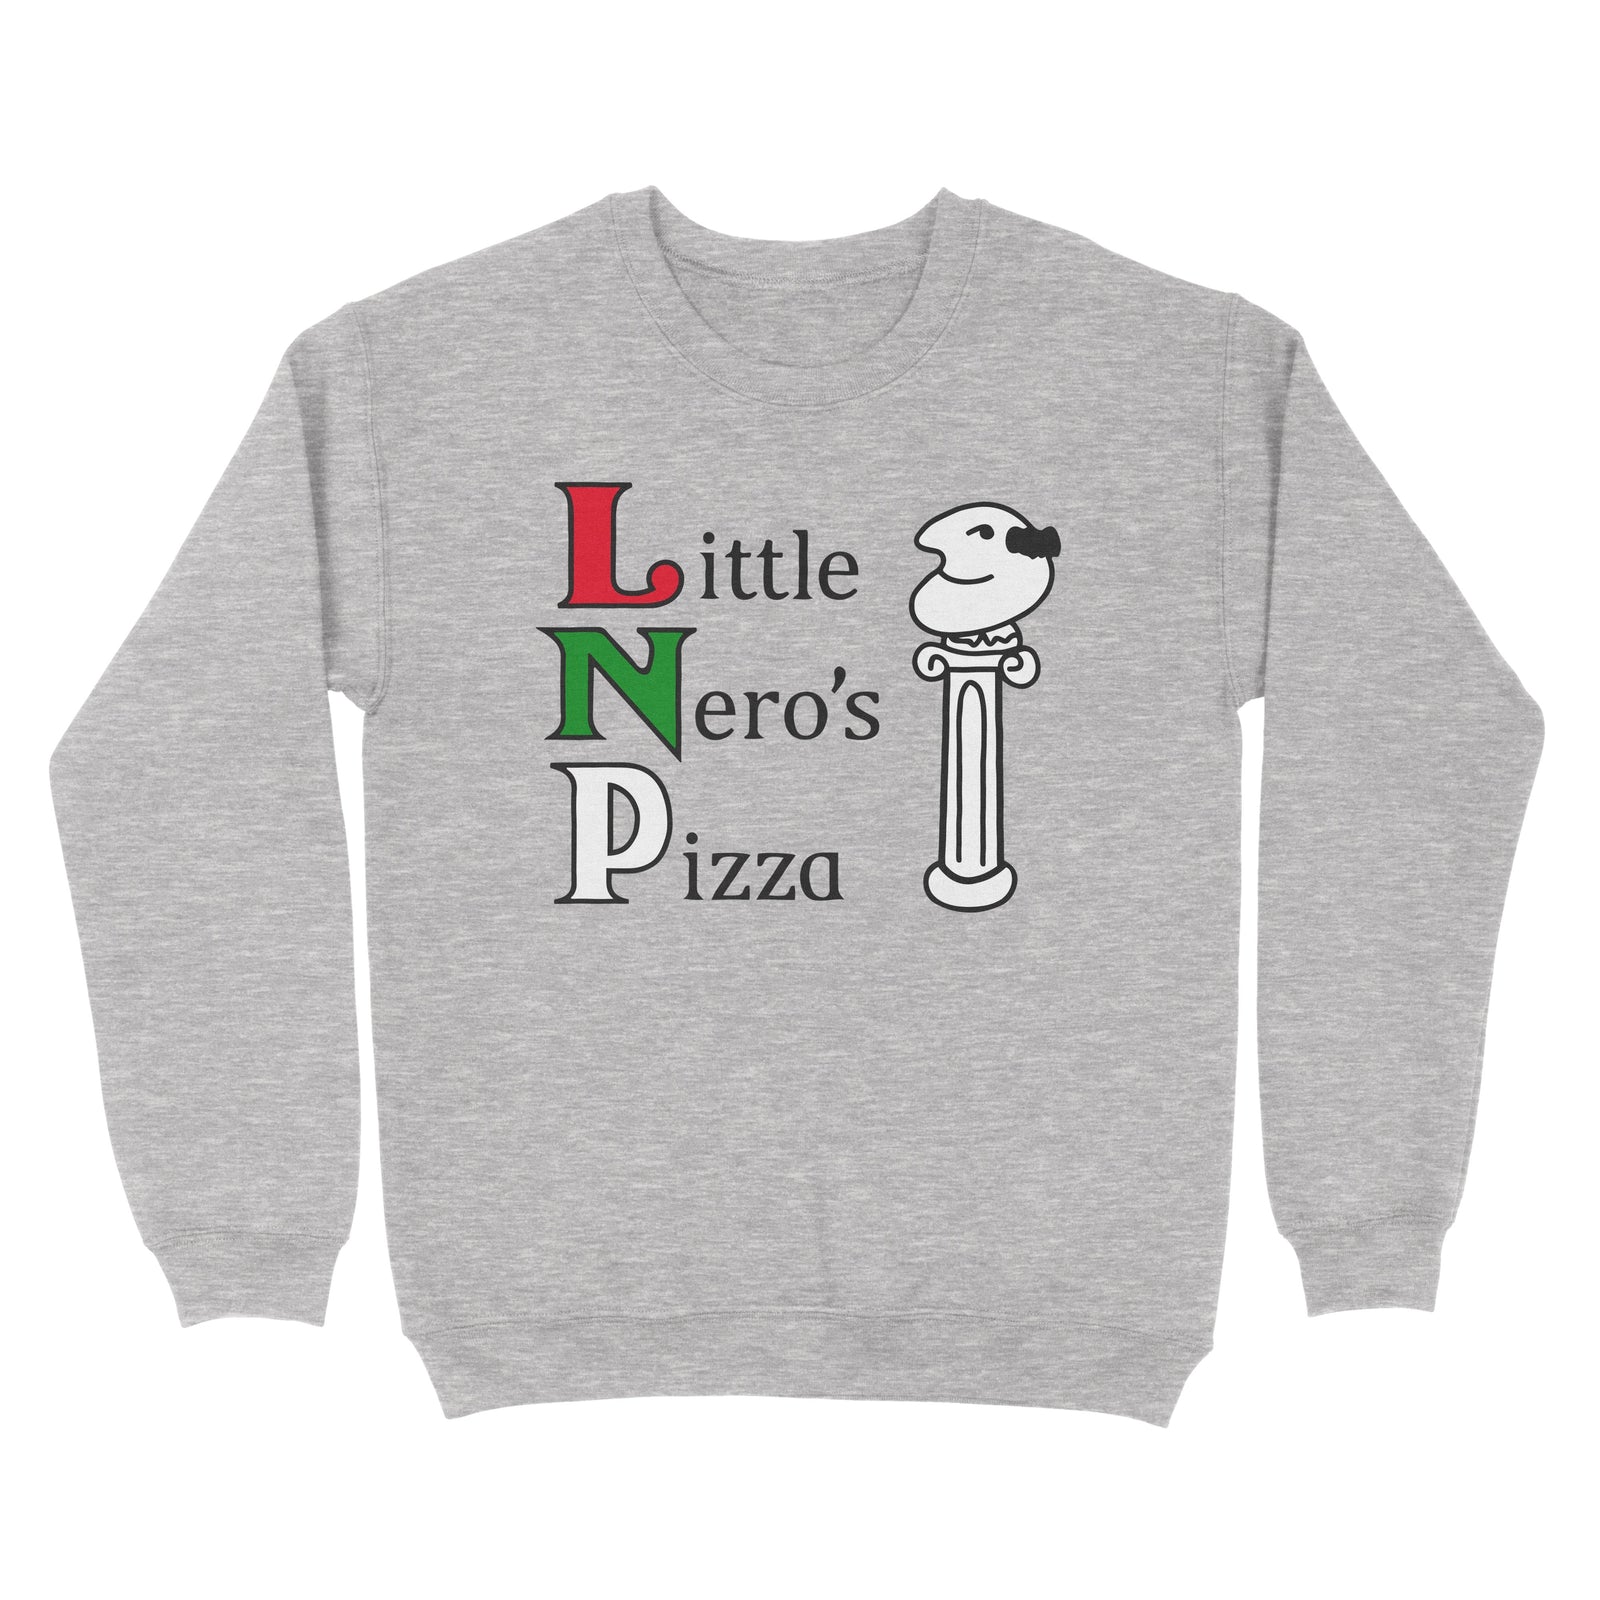 //cdn.shopify.com/s/files/1/0274/2488/2766/products/little-neros-pizza-ugly-sweater-288049_5000x.jpg?v=1607163835 5000w,
    //cdn.shopify.com/s/files/1/0274/2488/2766/products/little-neros-pizza-ugly-sweater-288049_4500x.jpg?v=1607163835 4500w,
    //cdn.shopify.com/s/files/1/0274/2488/2766/products/little-neros-pizza-ugly-sweater-288049_4000x.jpg?v=1607163835 4000w,
    //cdn.shopify.com/s/files/1/0274/2488/2766/products/little-neros-pizza-ugly-sweater-288049_3500x.jpg?v=1607163835 3500w,
    //cdn.shopify.com/s/files/1/0274/2488/2766/products/little-neros-pizza-ugly-sweater-288049_3000x.jpg?v=1607163835 3000w,
    //cdn.shopify.com/s/files/1/0274/2488/2766/products/little-neros-pizza-ugly-sweater-288049_2500x.jpg?v=1607163835 2500w,
    //cdn.shopify.com/s/files/1/0274/2488/2766/products/little-neros-pizza-ugly-sweater-288049_2000x.jpg?v=1607163835 2000w,
    //cdn.shopify.com/s/files/1/0274/2488/2766/products/little-neros-pizza-ugly-sweater-288049_1800x.jpg?v=1607163835 1800w,
    //cdn.shopify.com/s/files/1/0274/2488/2766/products/little-neros-pizza-ugly-sweater-288049_1600x.jpg?v=1607163835 1600w,
    //cdn.shopify.com/s/files/1/0274/2488/2766/products/little-neros-pizza-ugly-sweater-288049_1400x.jpg?v=1607163835 1400w,
    //cdn.shopify.com/s/files/1/0274/2488/2766/products/little-neros-pizza-ugly-sweater-288049_1200x.jpg?v=1607163835 1200w,
    //cdn.shopify.com/s/files/1/0274/2488/2766/products/little-neros-pizza-ugly-sweater-288049_1000x.jpg?v=1607163835 1000w,
    //cdn.shopify.com/s/files/1/0274/2488/2766/products/little-neros-pizza-ugly-sweater-288049_800x.jpg?v=1607163835 800w,
    //cdn.shopify.com/s/files/1/0274/2488/2766/products/little-neros-pizza-ugly-sweater-288049_600x.jpg?v=1607163835 600w,
    //cdn.shopify.com/s/files/1/0274/2488/2766/products/little-neros-pizza-ugly-sweater-288049_400x.jpg?v=1607163835 400w,
    //cdn.shopify.com/s/files/1/0274/2488/2766/products/little-neros-pizza-ugly-sweater-288049_200x.jpg?v=1607163835 200w